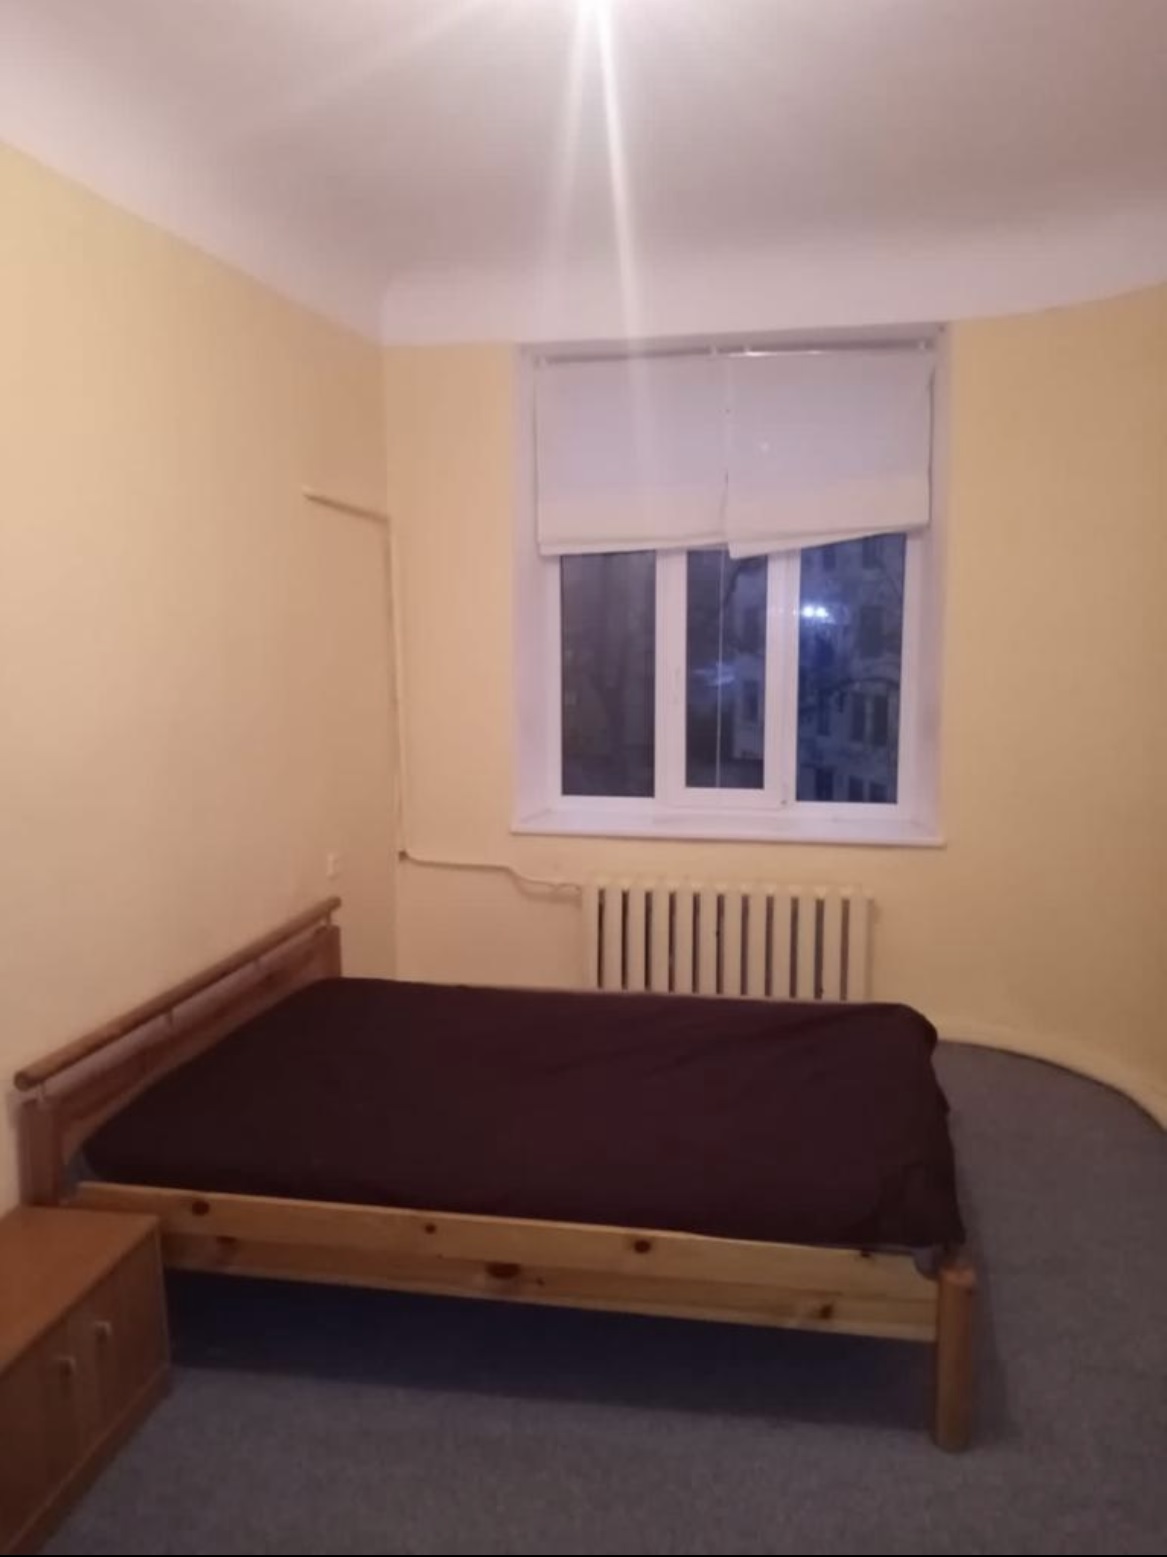 Apartment for rent, Stabu street 90 - Image 1